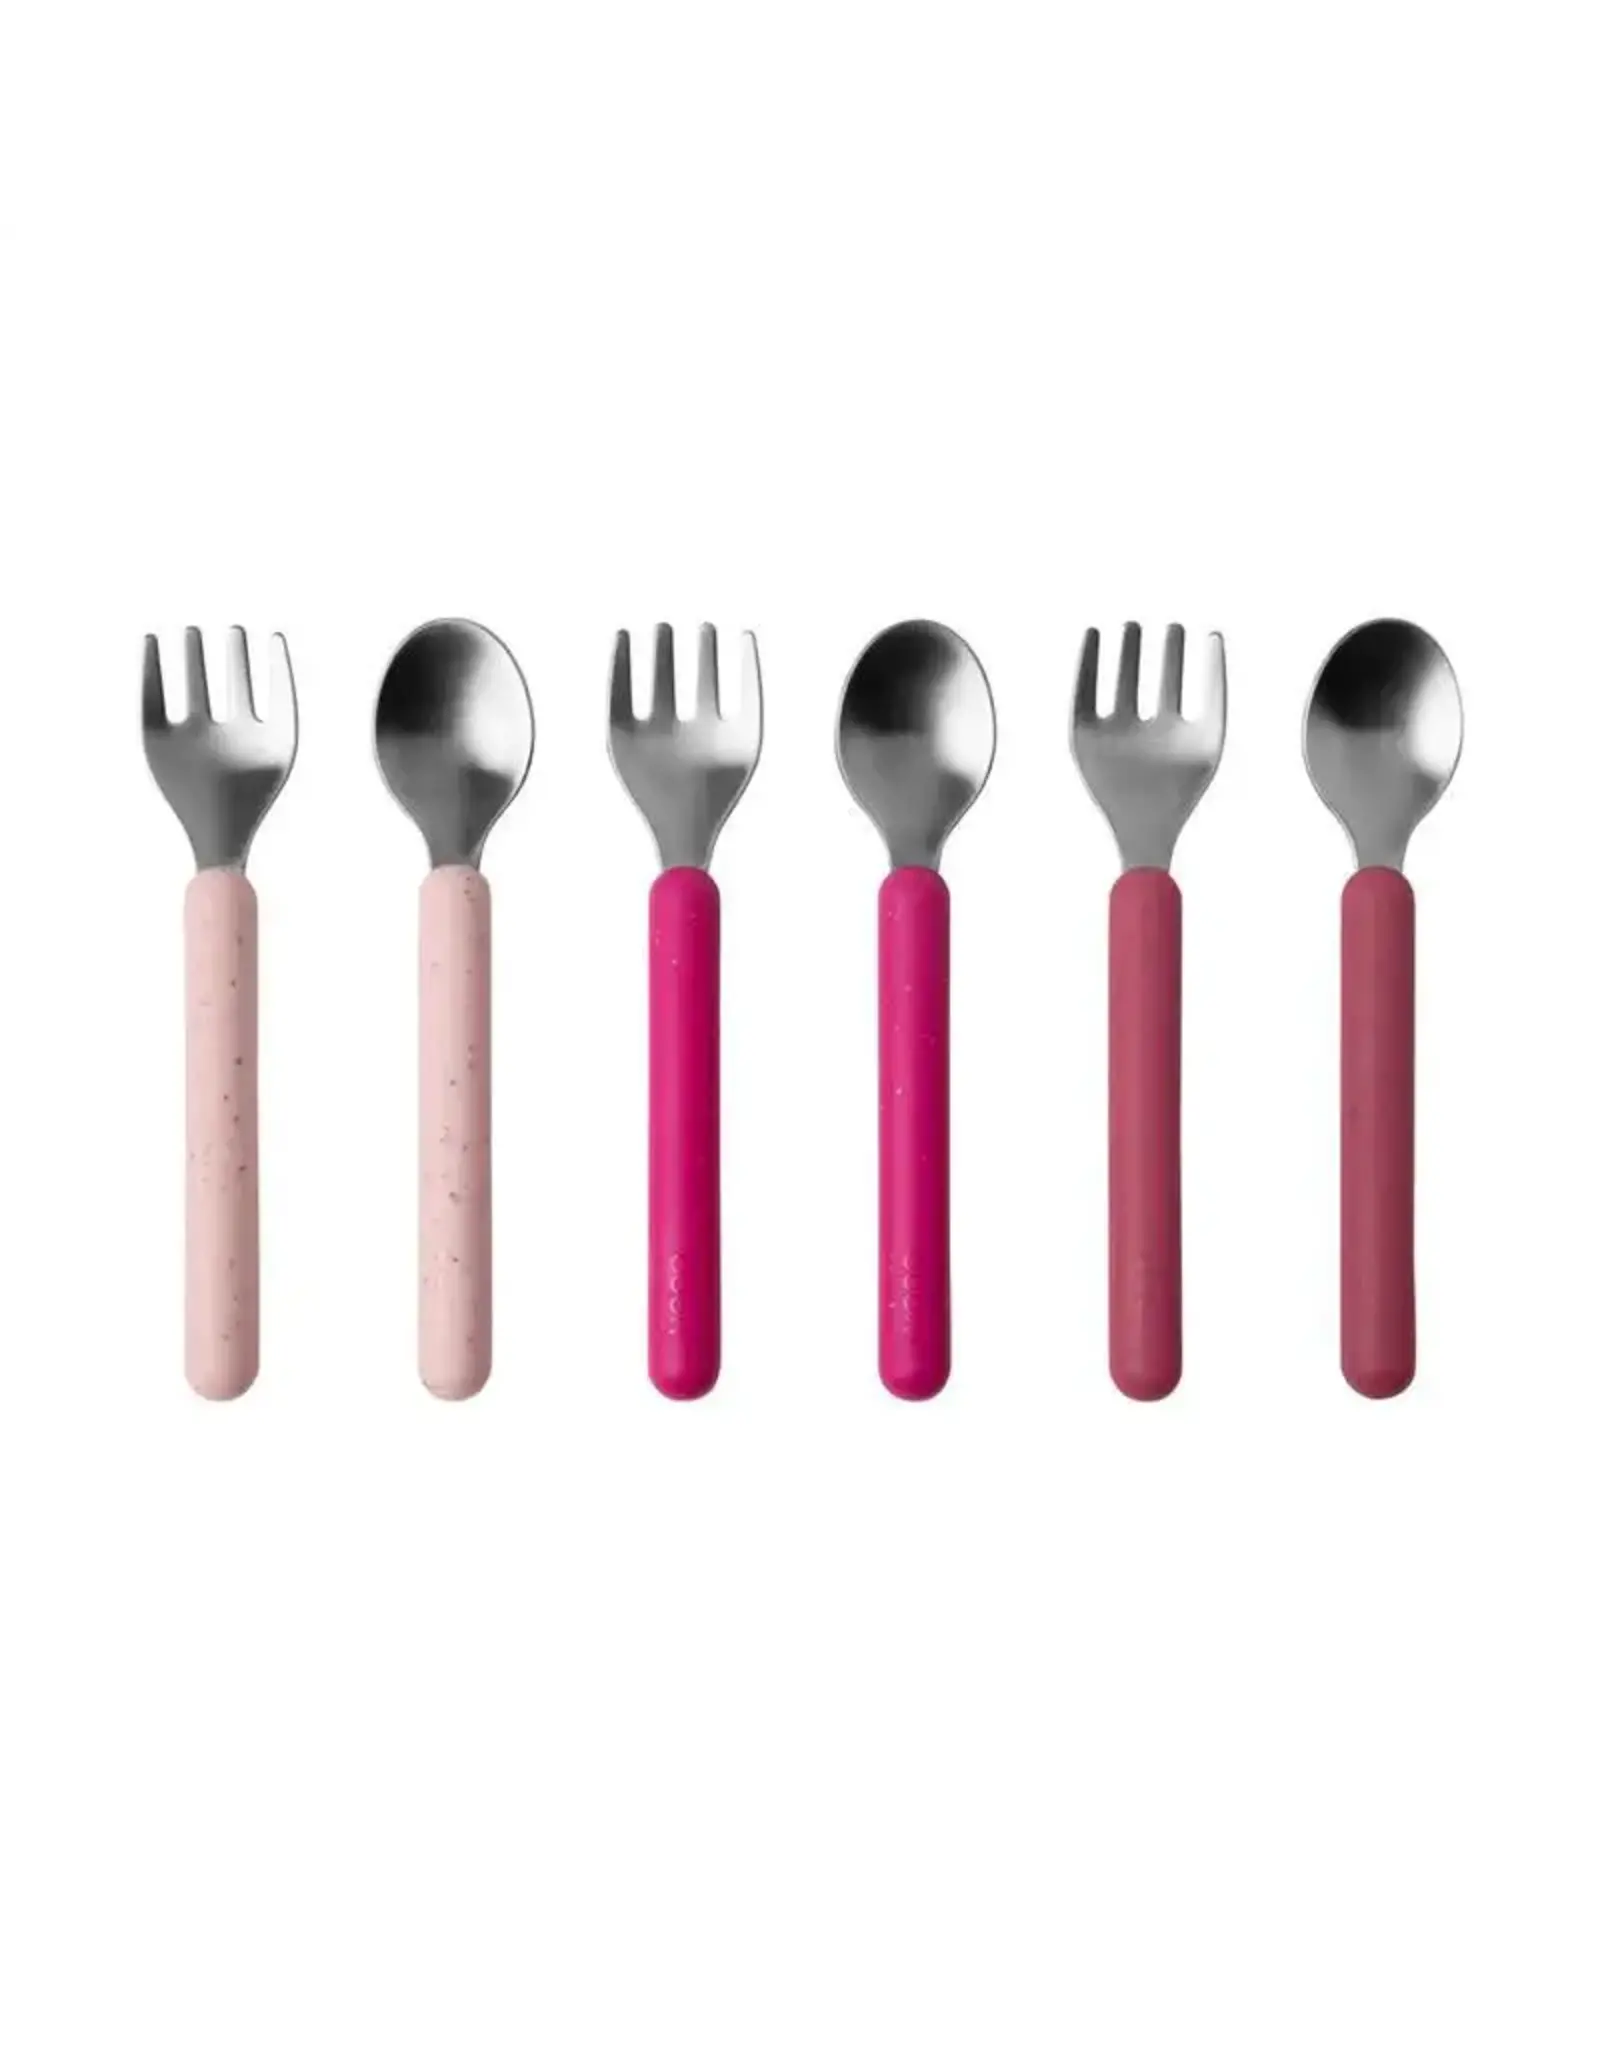 Boon Chow Utensils 6 Pieces Pink